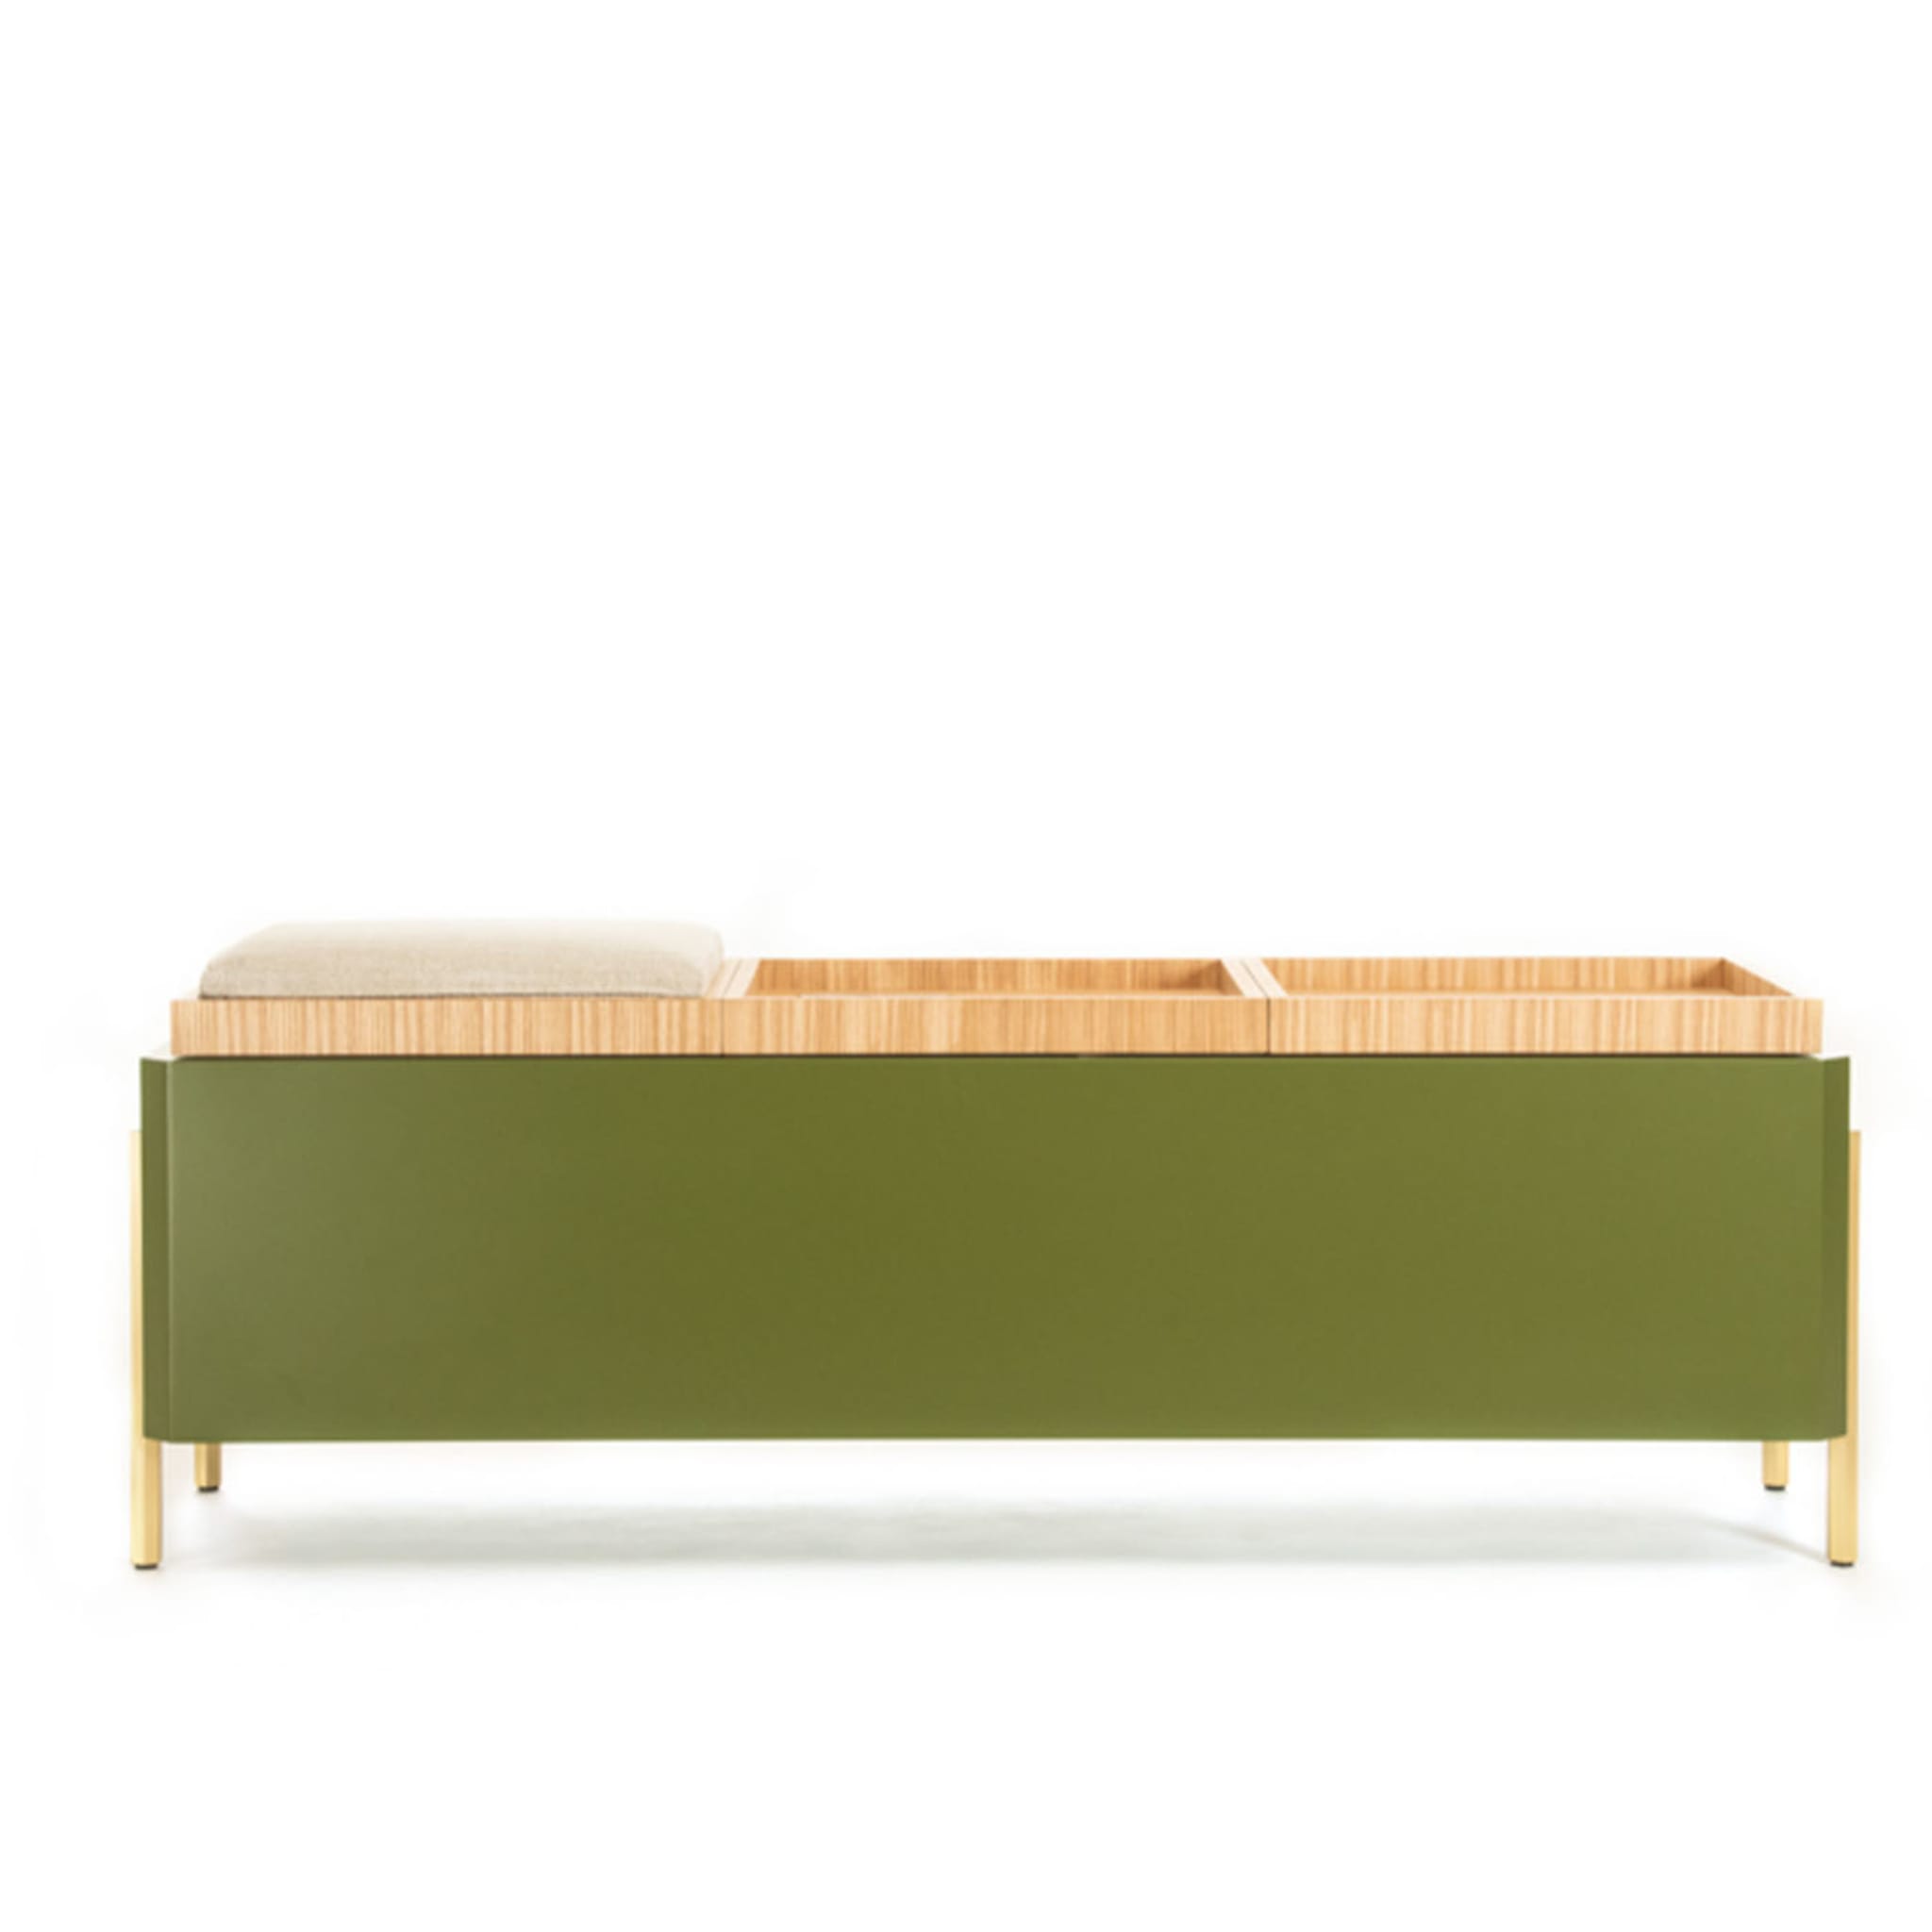 Panarea Ash and Marble Sideboard - Alternative view 5